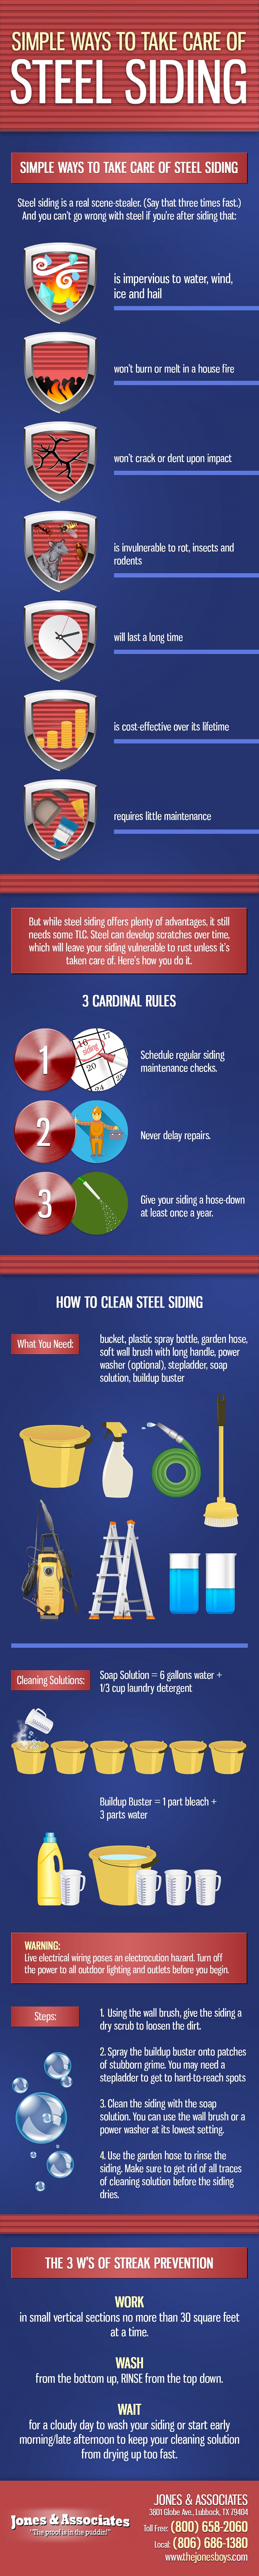 Simple Ways to Take Care of Steel Siding